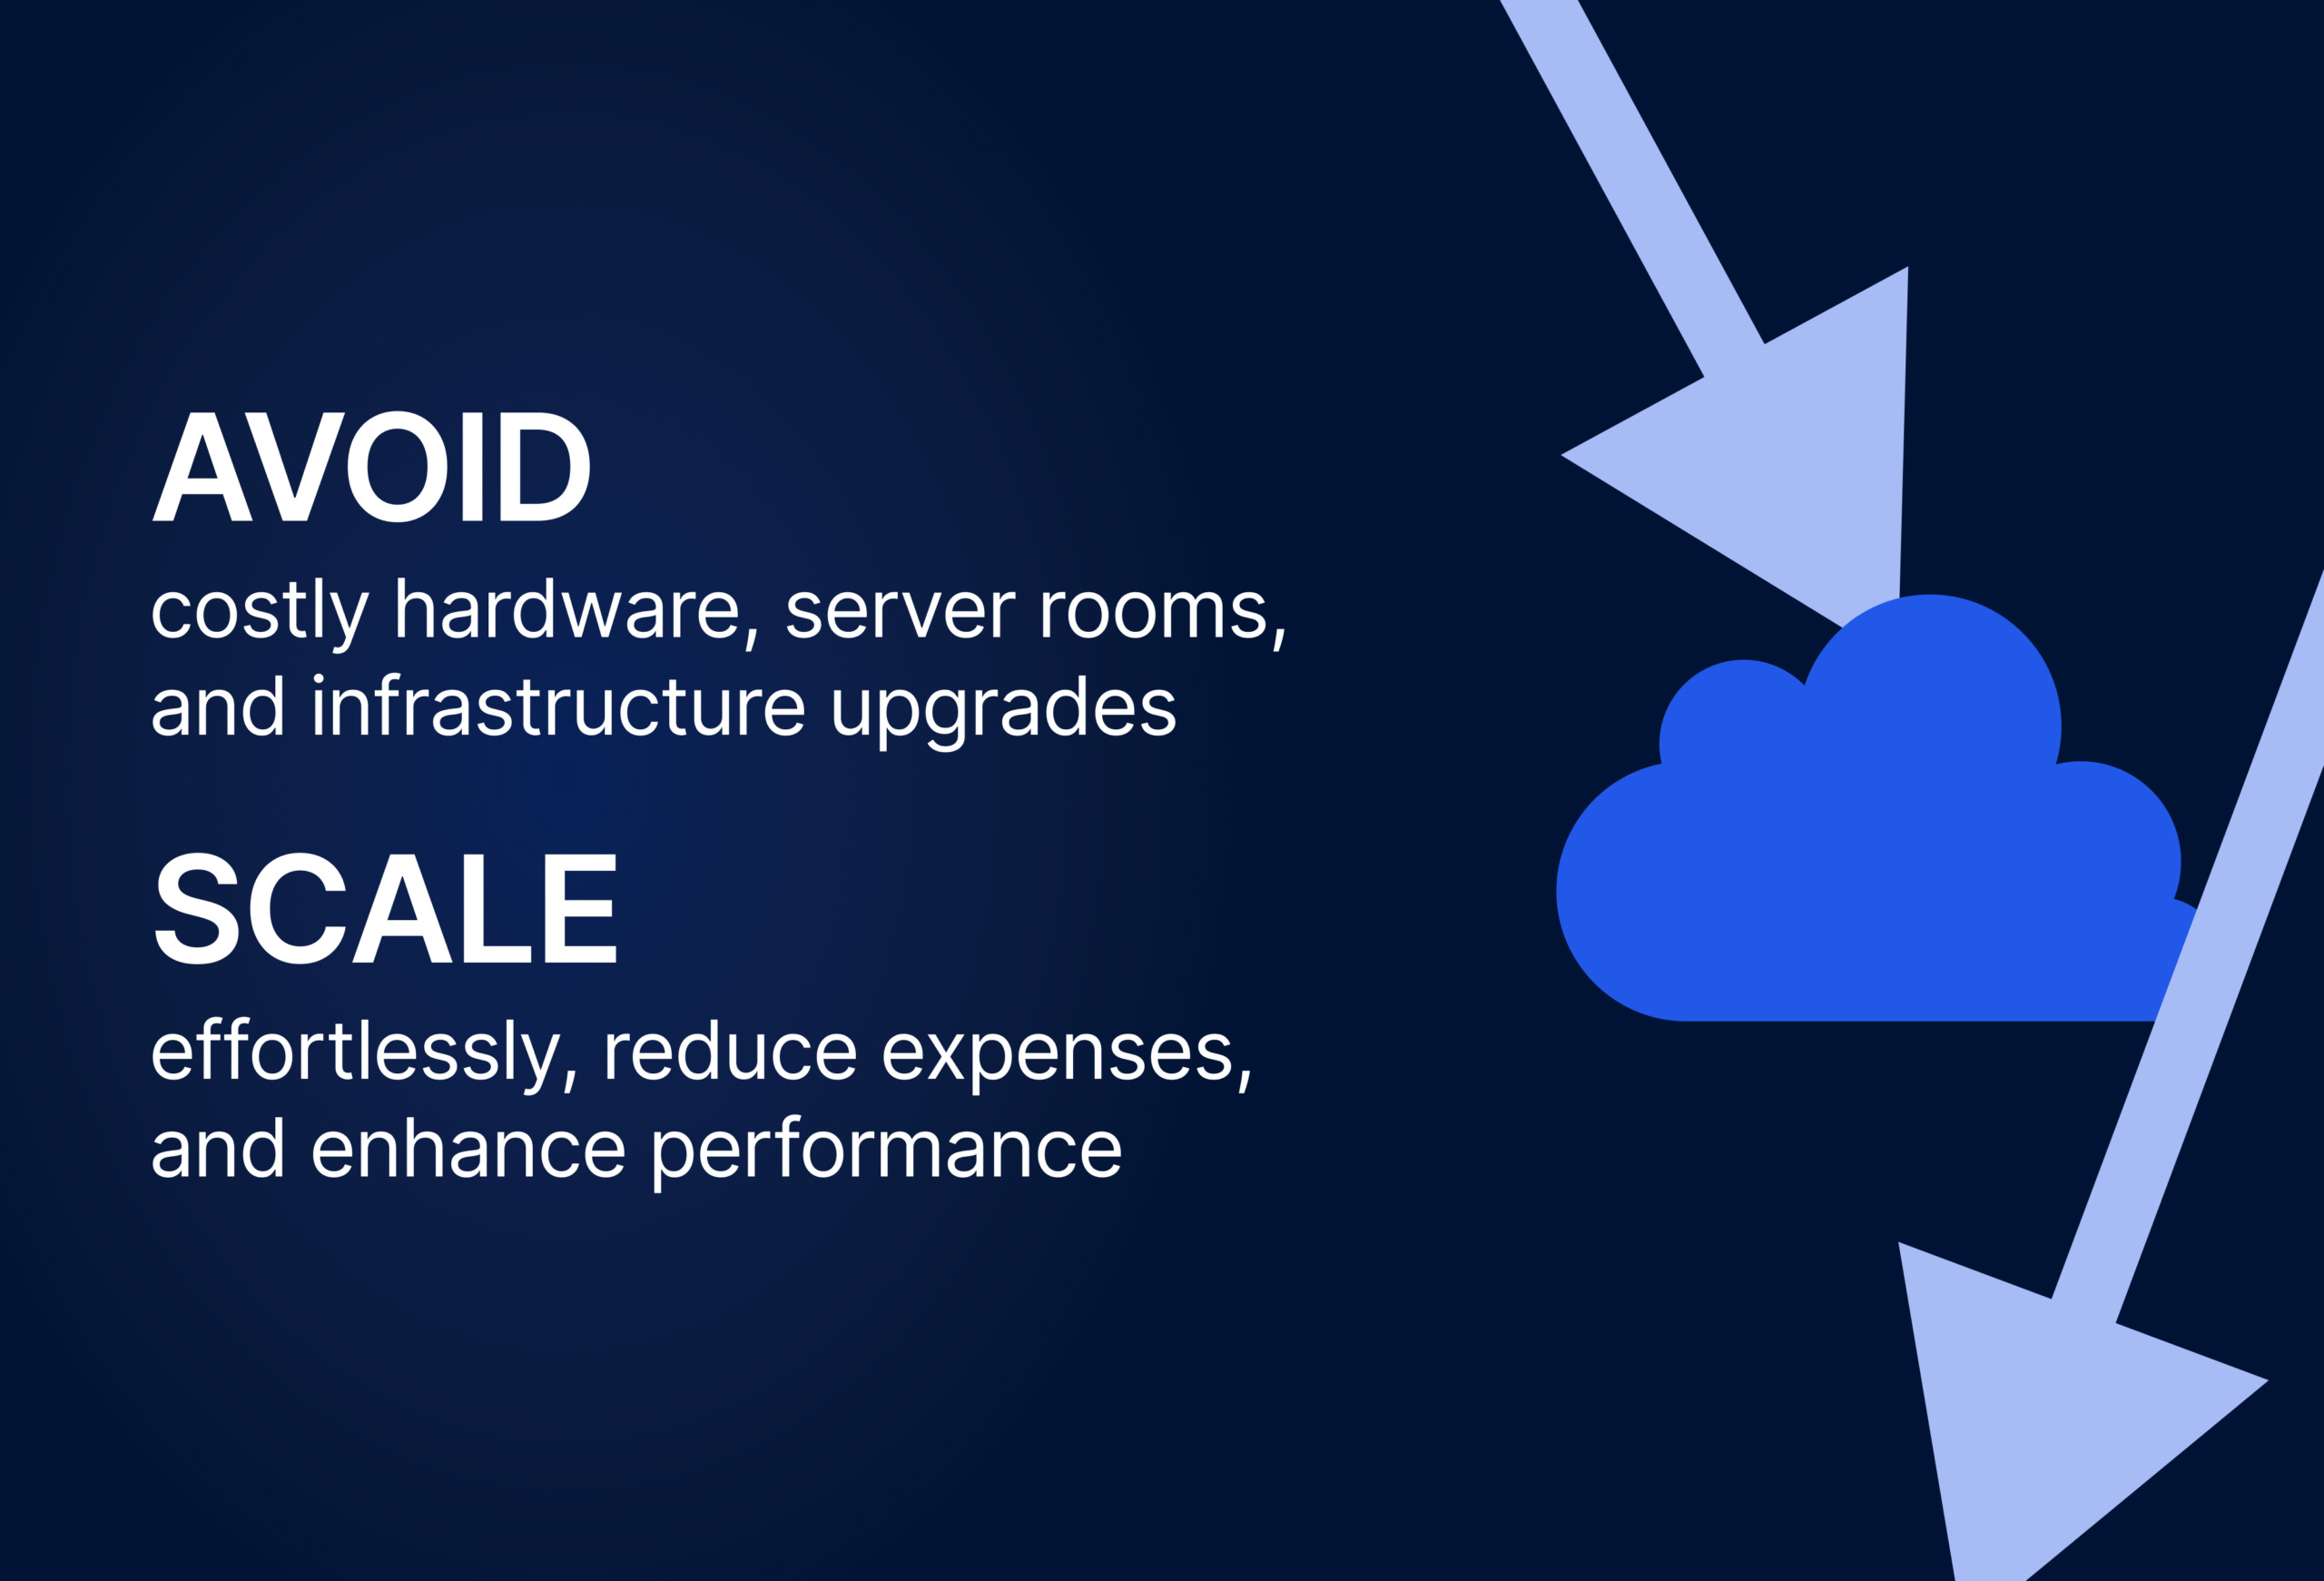 Why choose a cloud warehouse solution